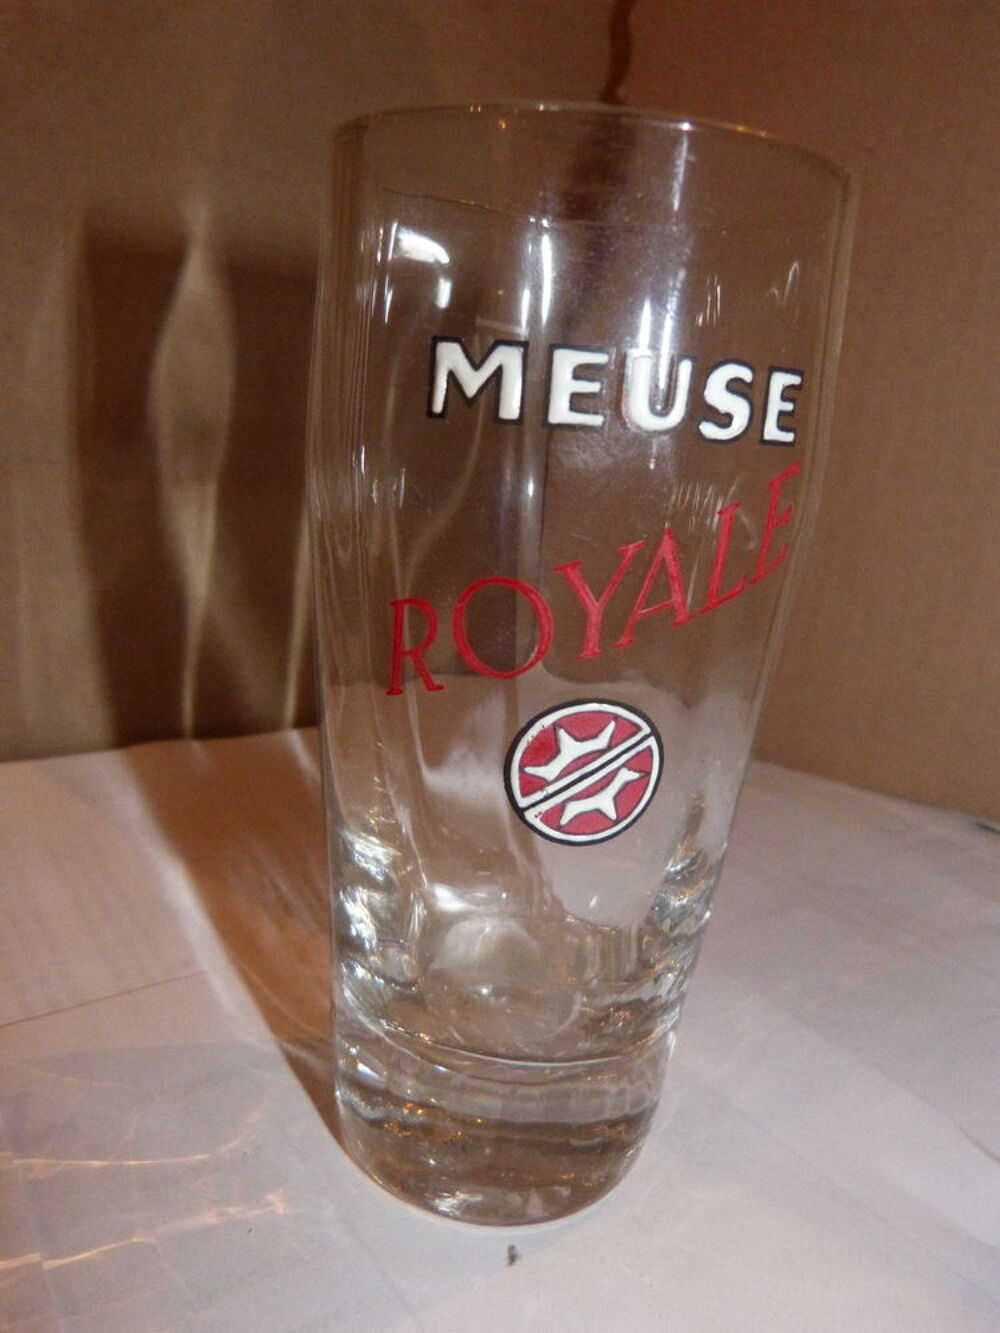 VERRE EMAILLEE ROYALE MEUSE 